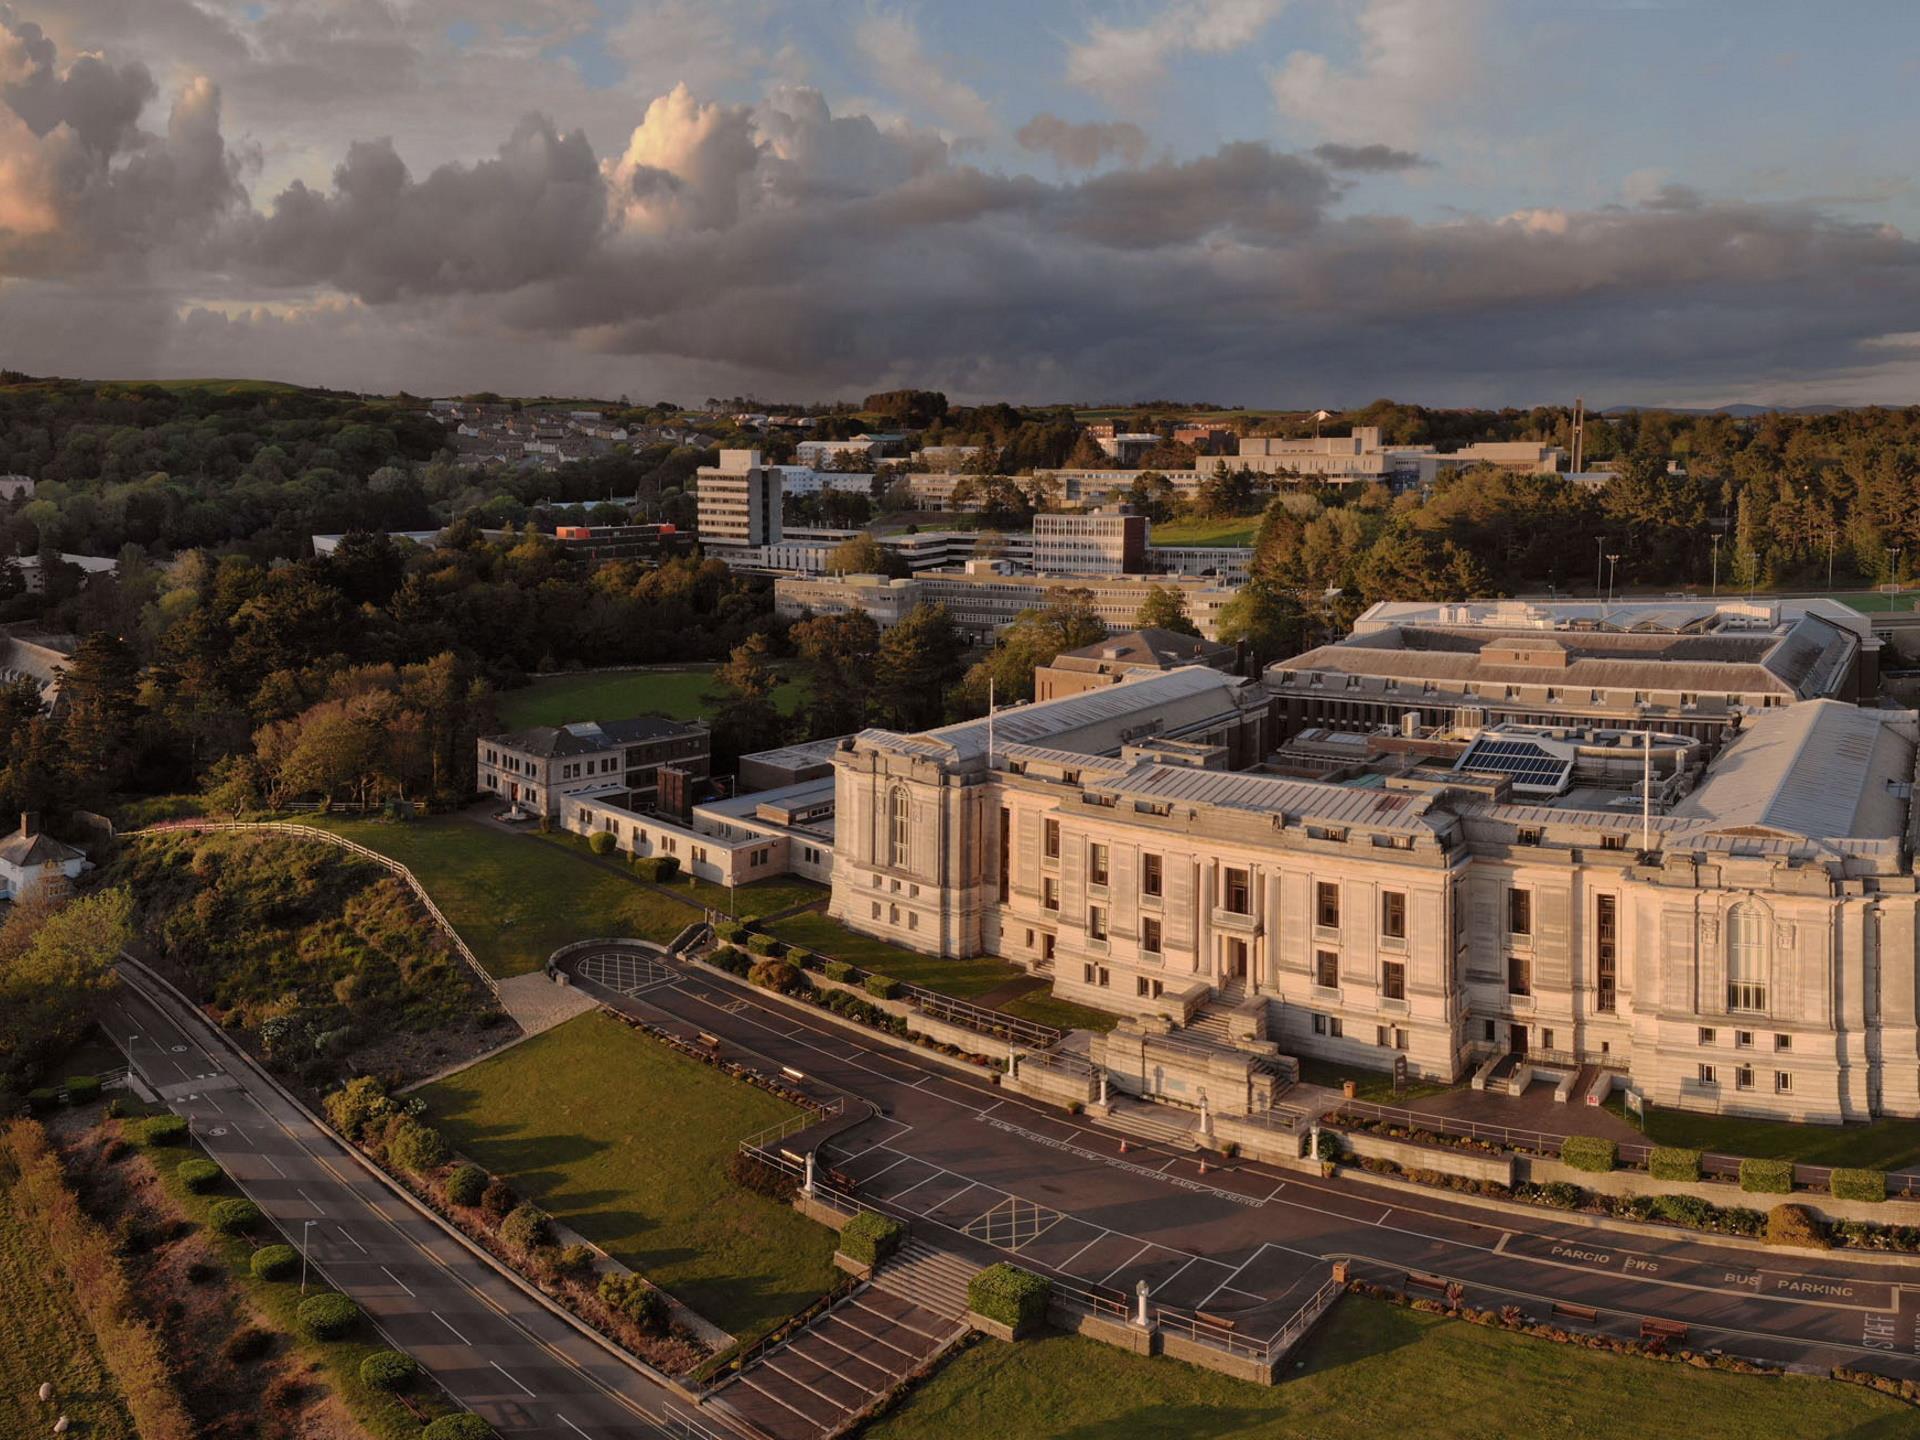 The National Library of Wales, Aberystwyth